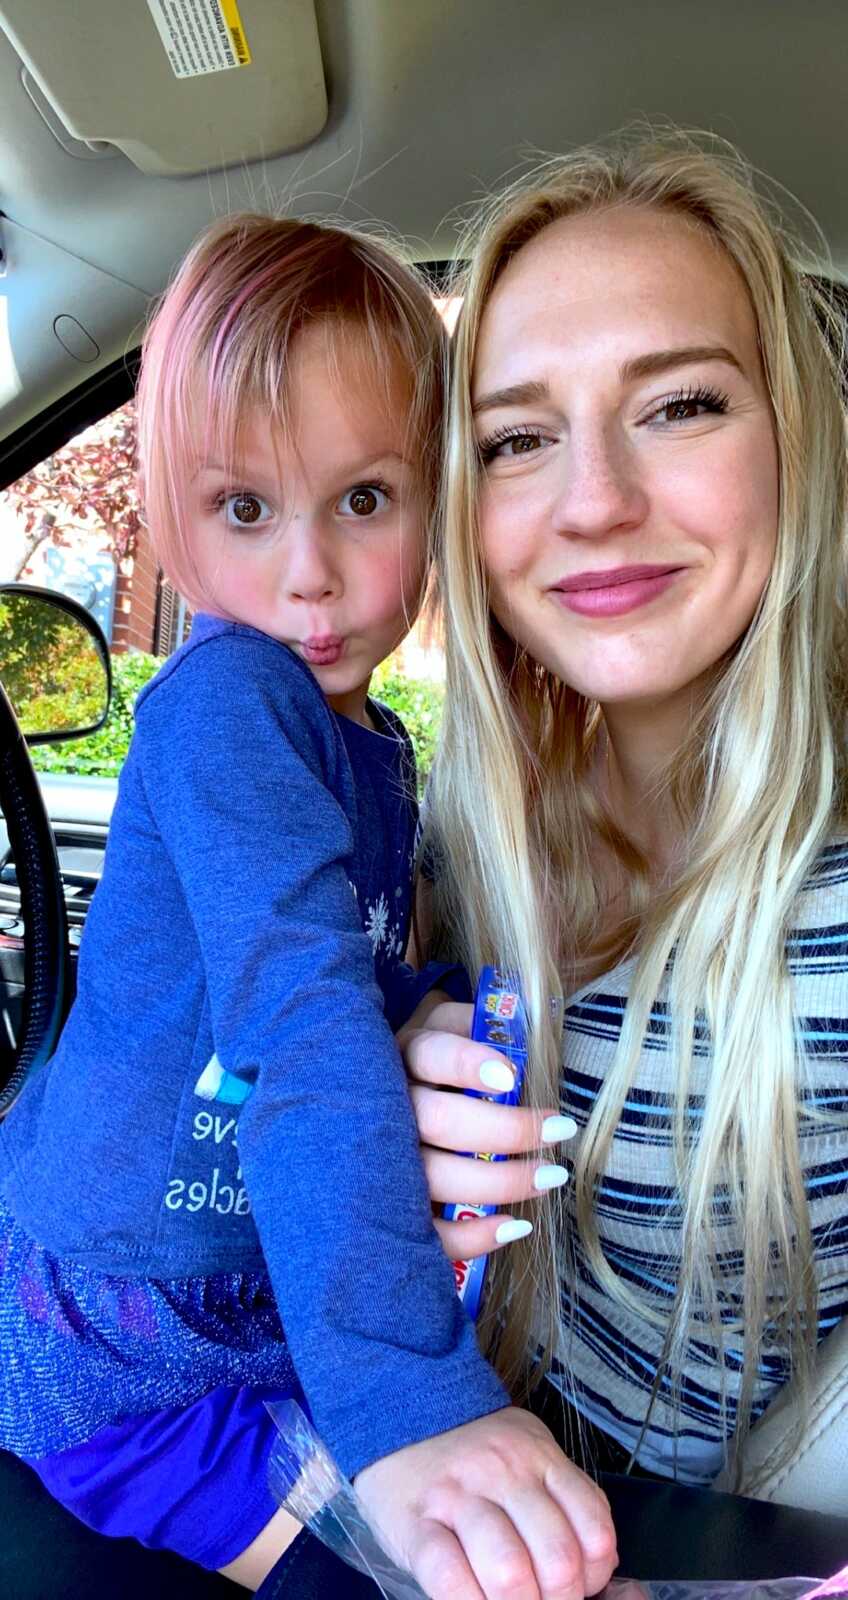 mom takes a selfie in the car with her daughter while the young girl makes a silly face